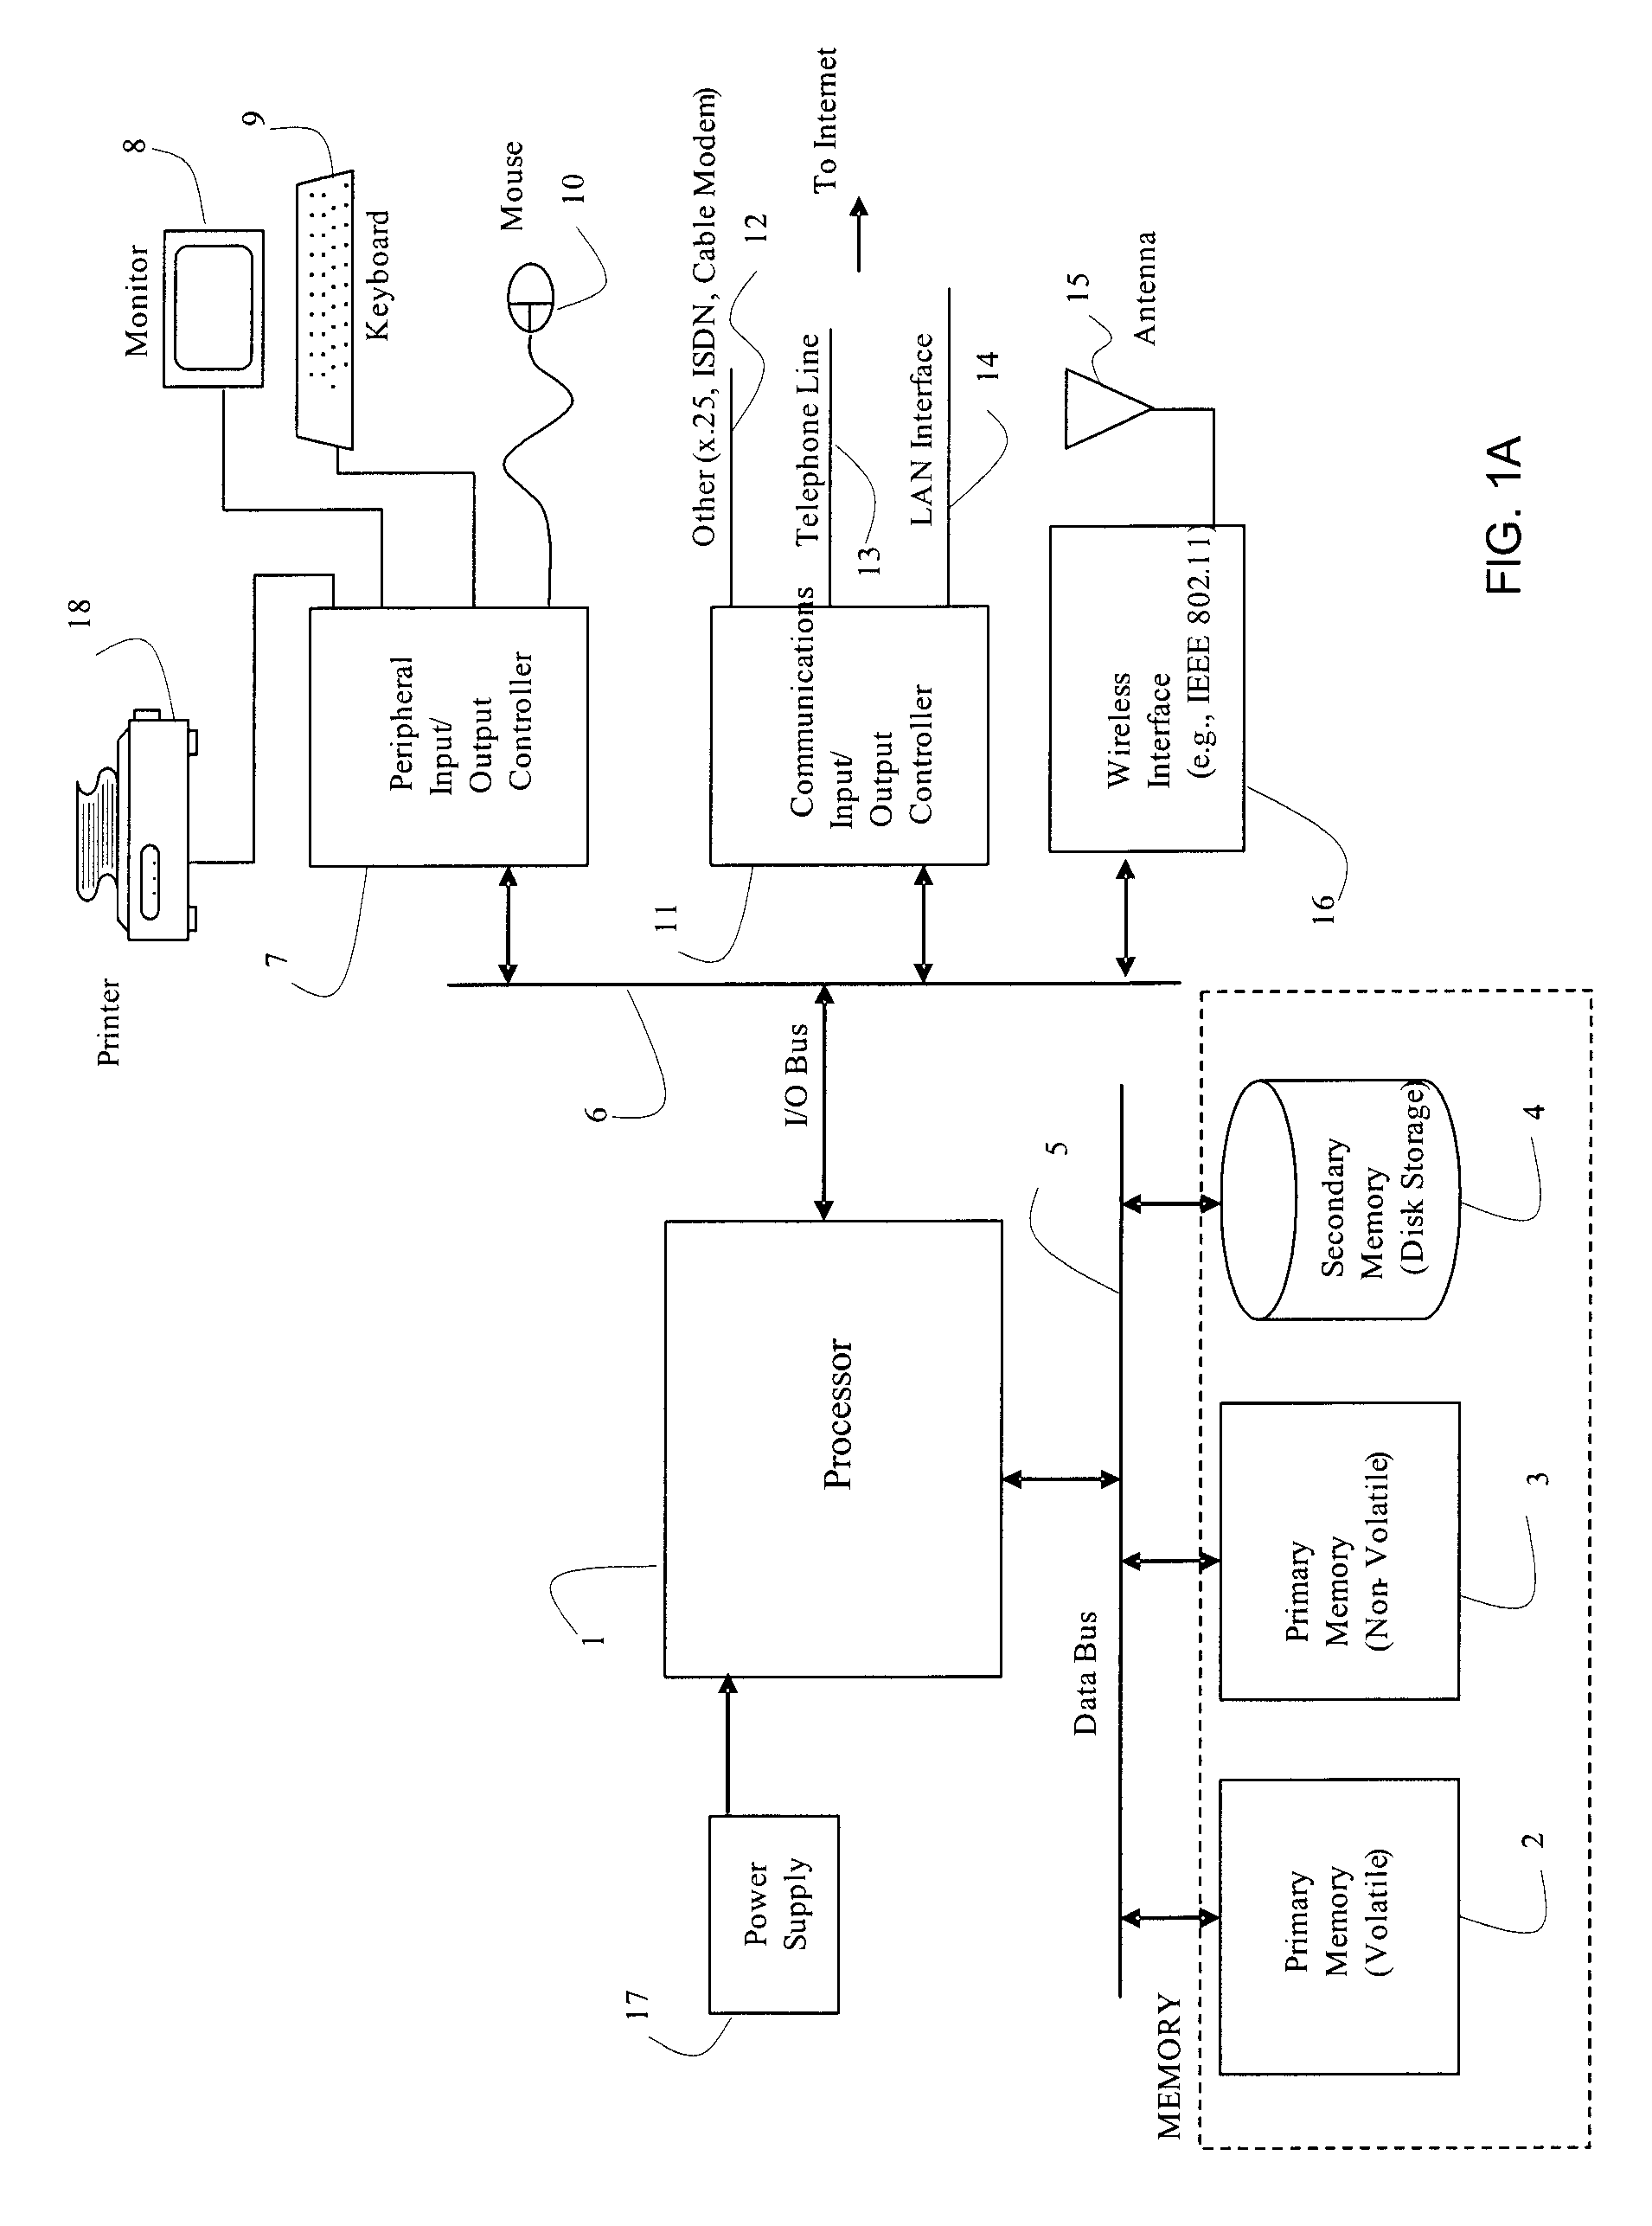 Identity-based conferencing systems and methods